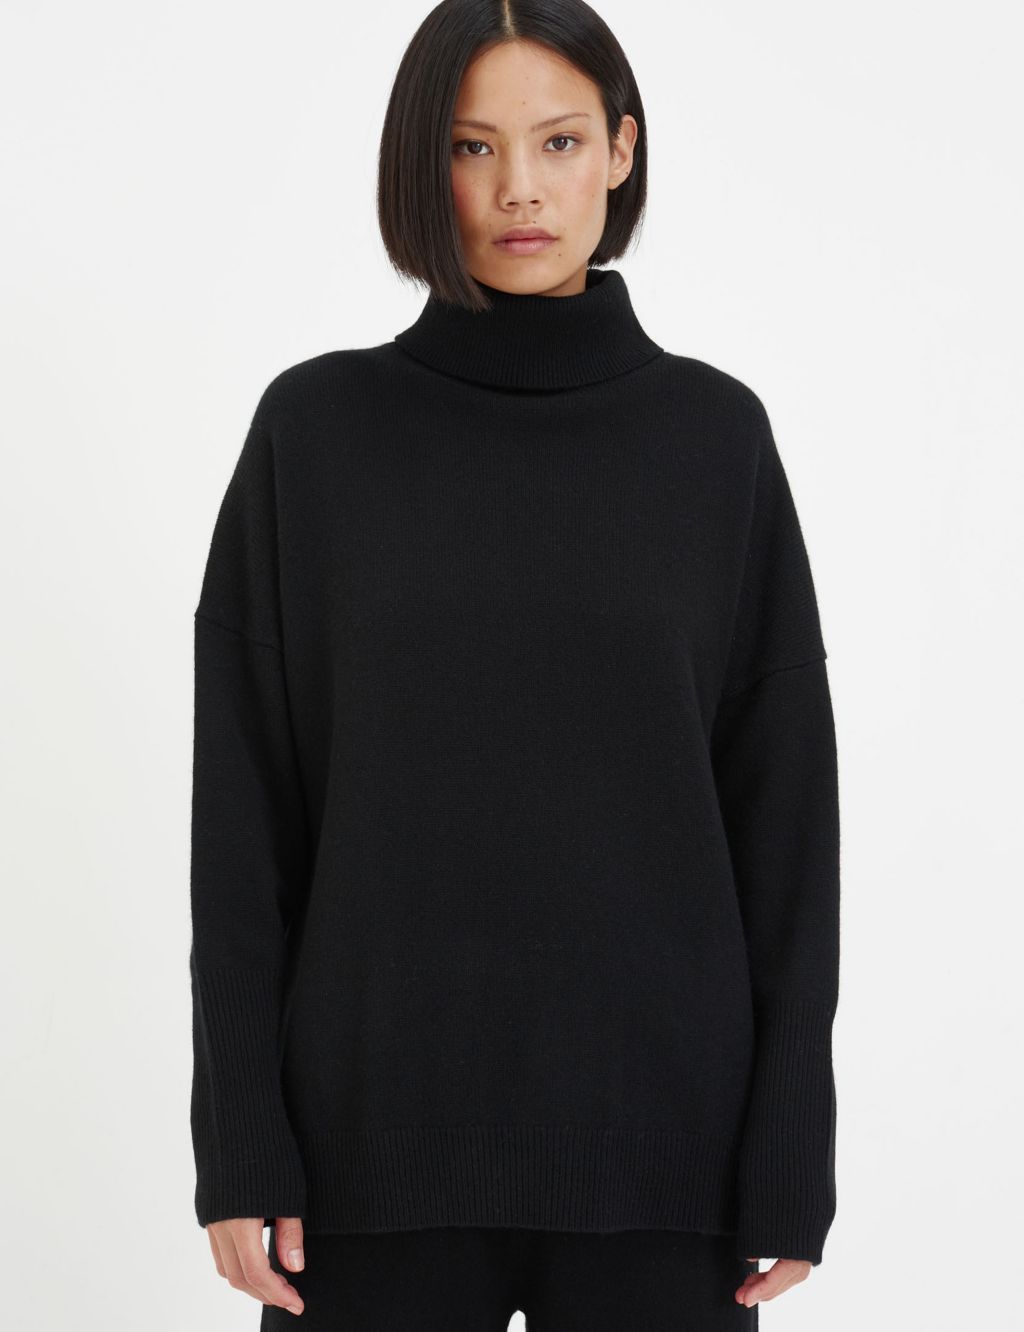 Roll Neck Jumpers  The Best Thin & Ribbed Knitwear For Ladies - Reiss